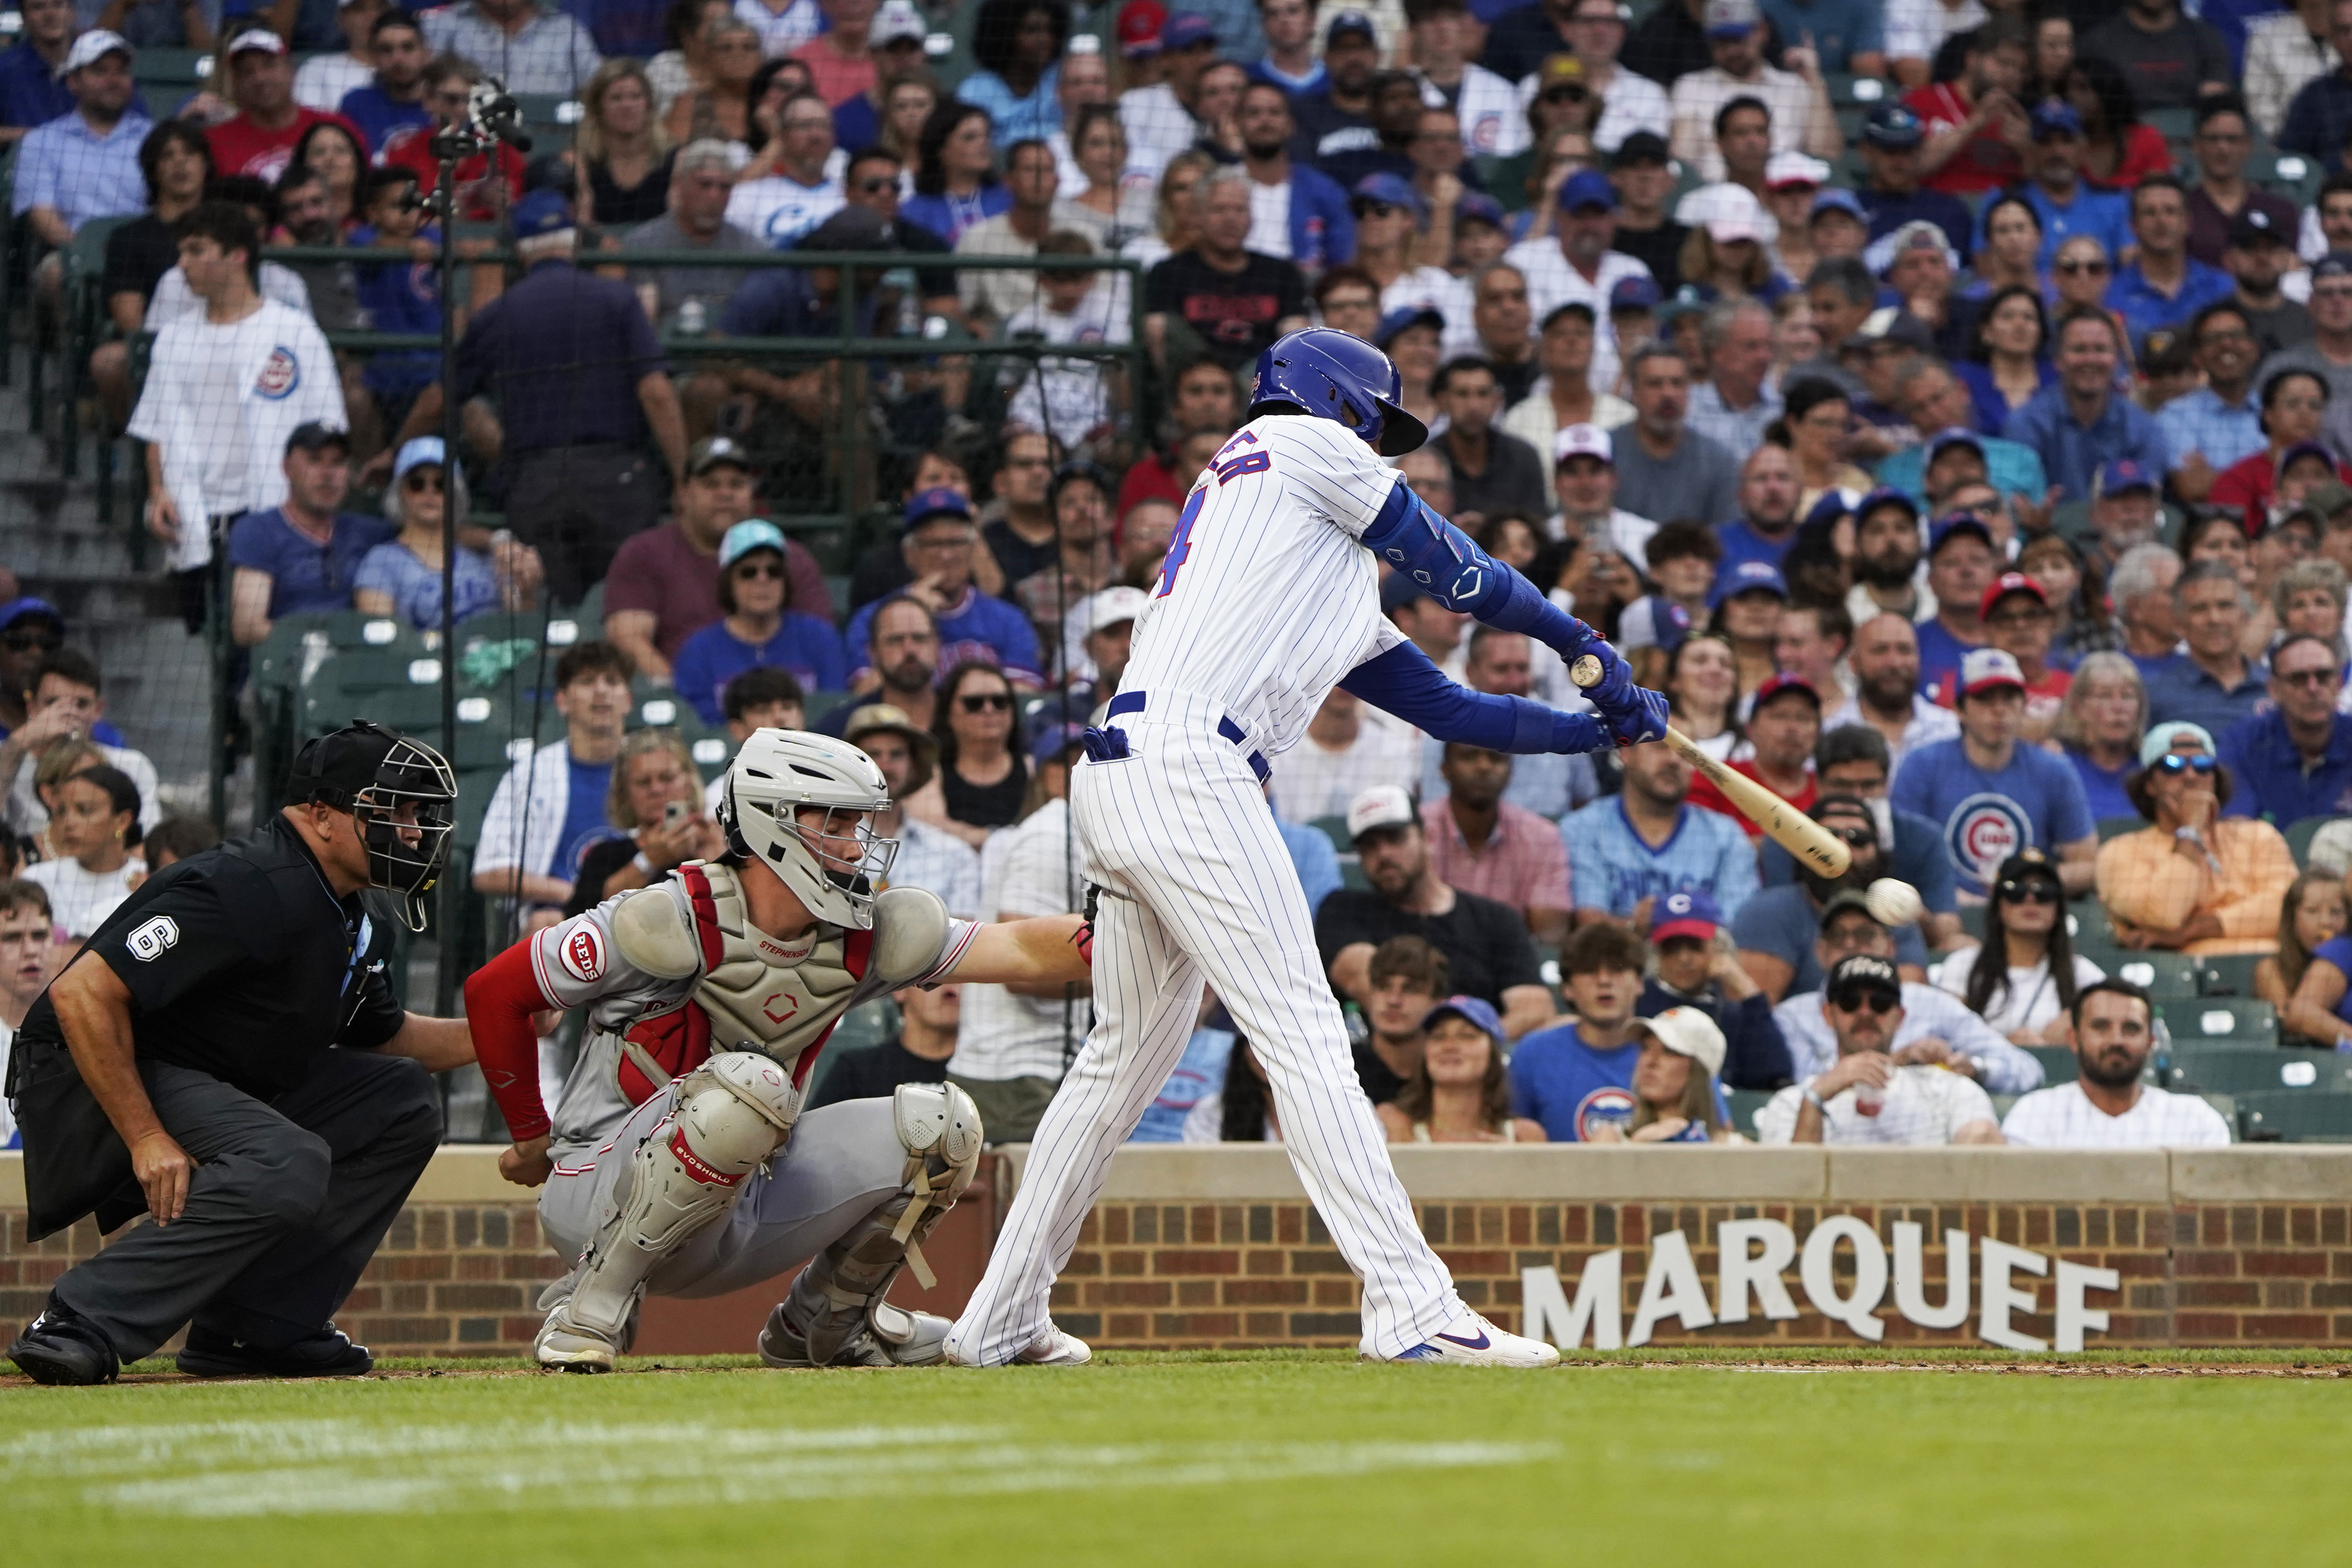 Cubs score 20 runs, bash seven homers in rout of rival Reds